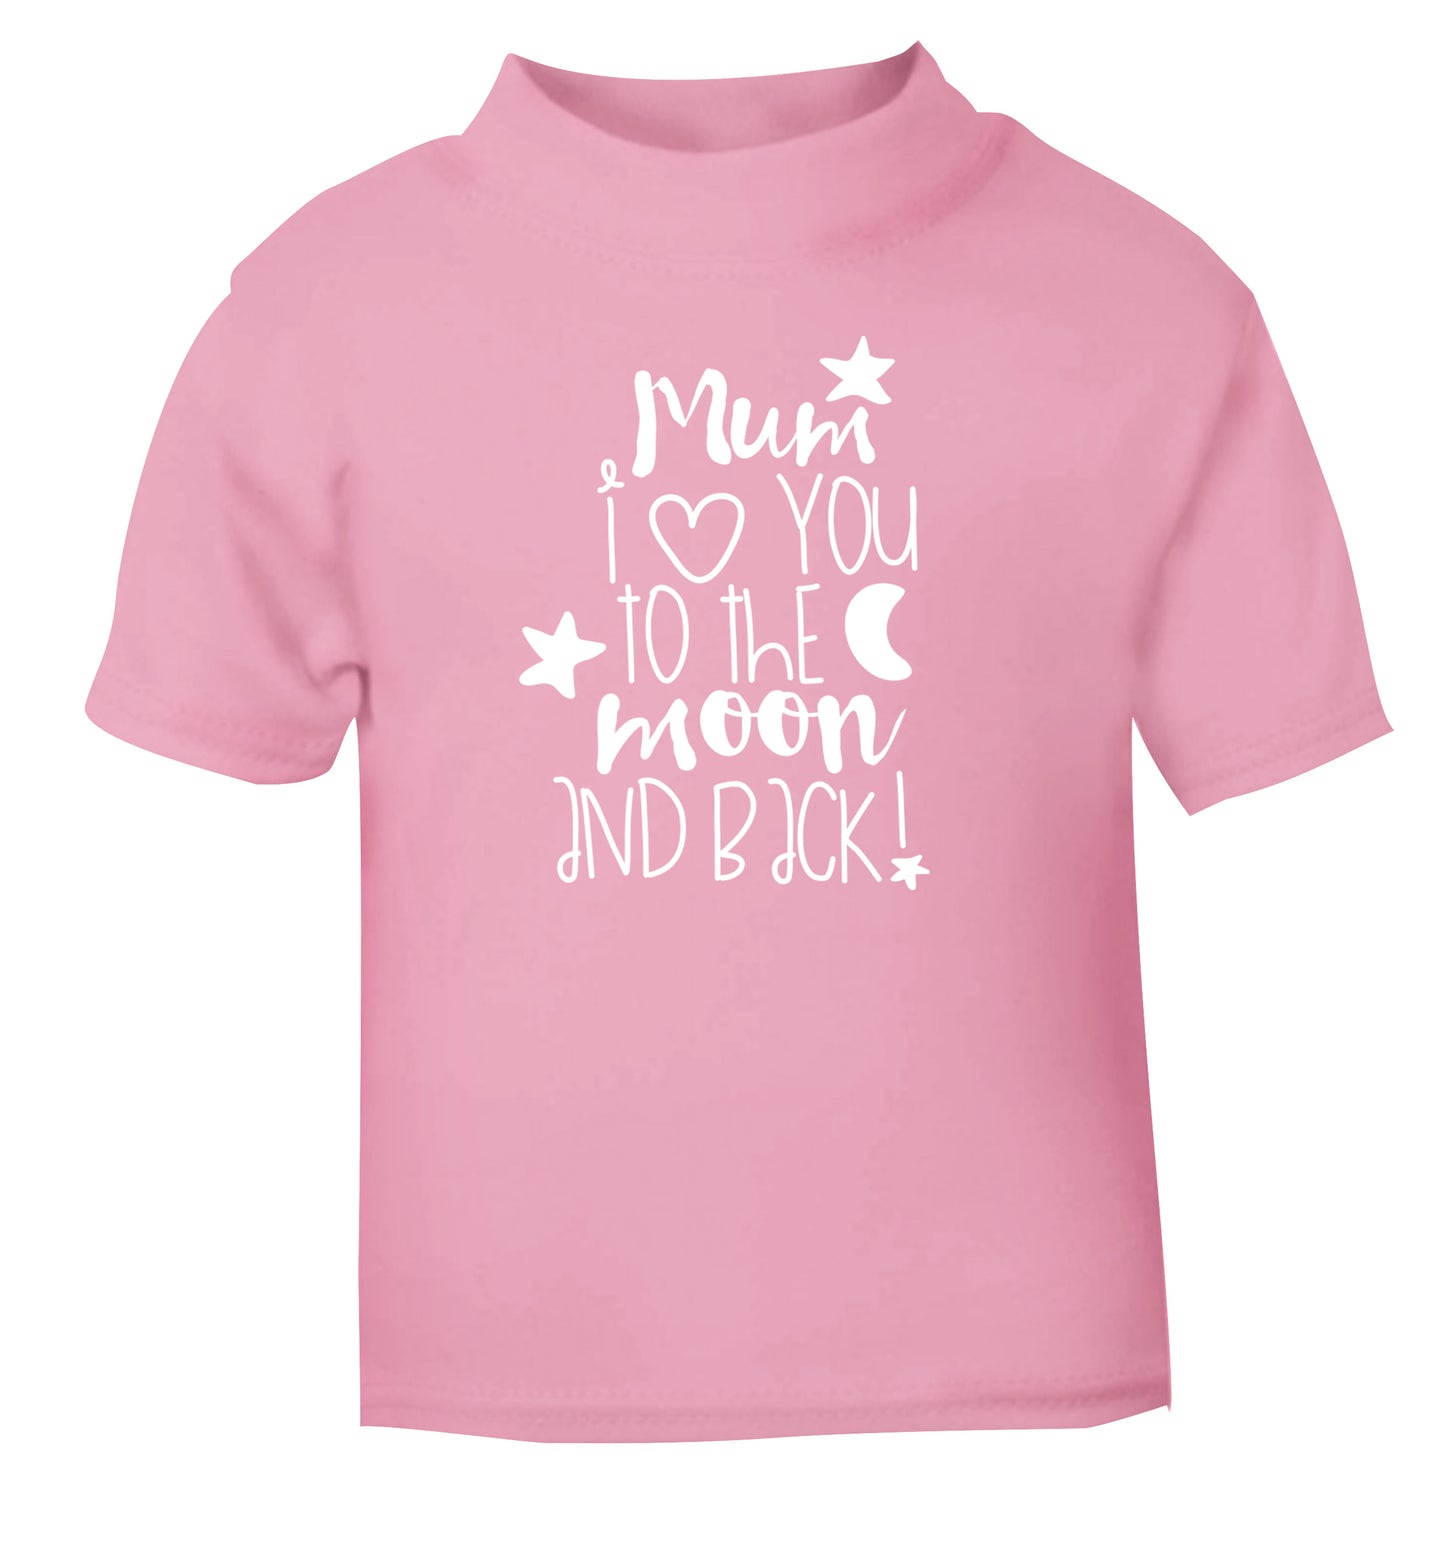 Mum I love you to the moon and back light pink baby toddler Tshirt 2 Years